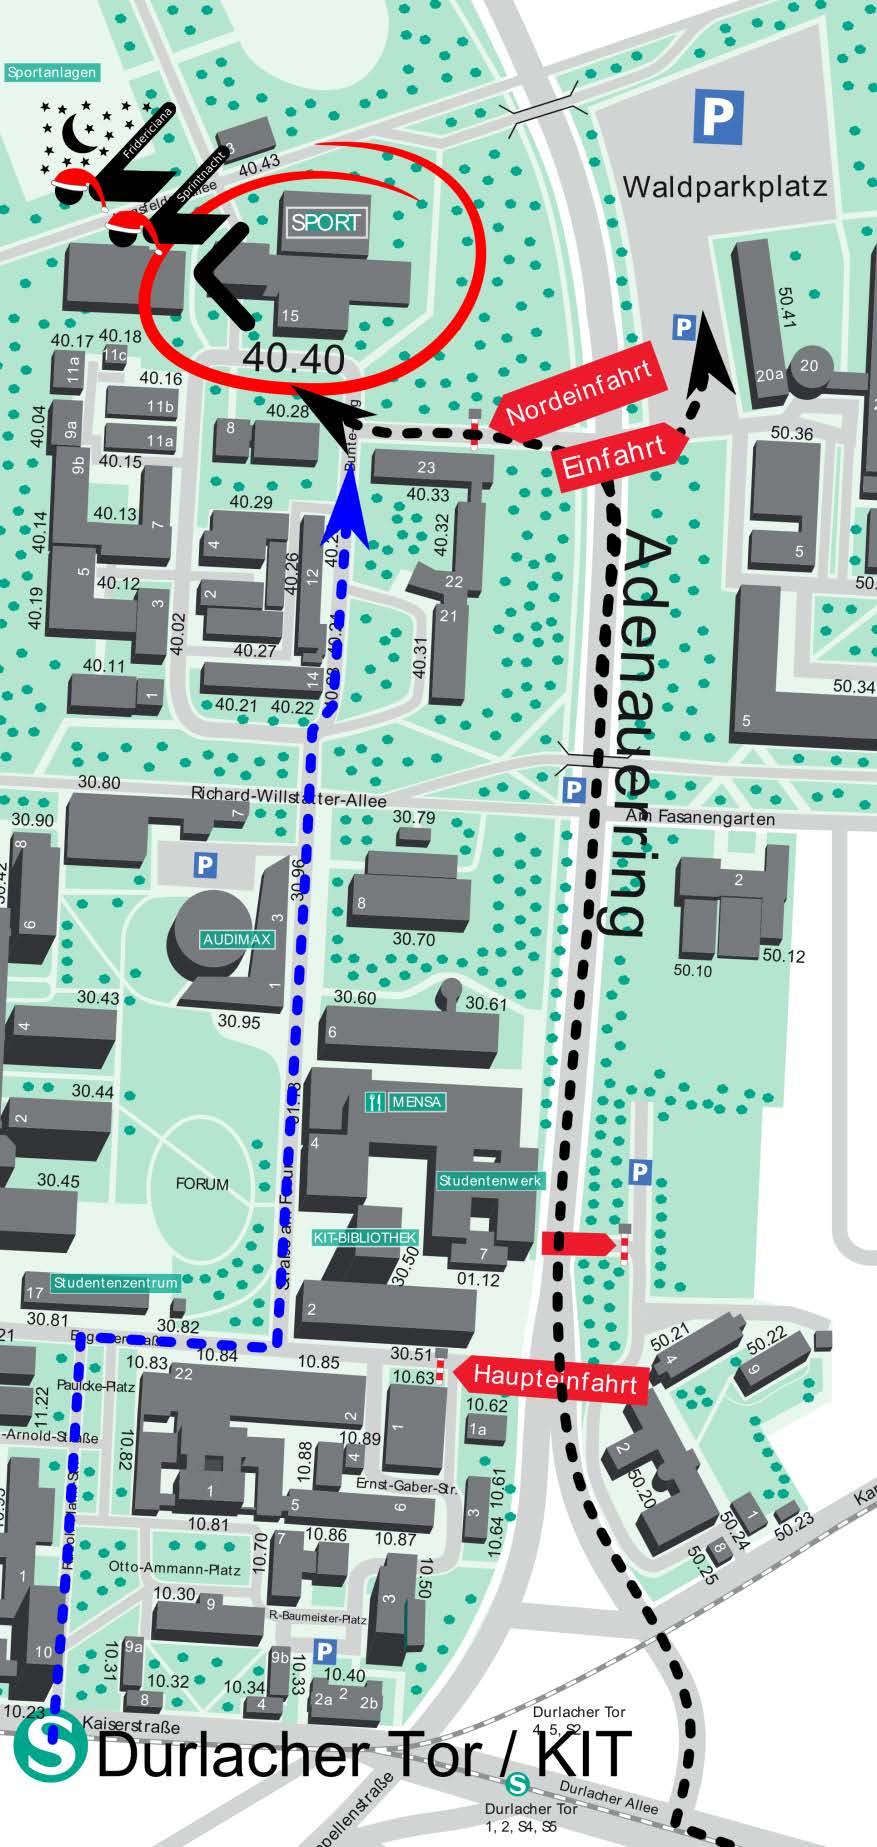 DIRECTIONS The whole event takes place in the Institute for Sports on the 'Campus Süd' (south campus) of KIT, the accommodation will be in the same building: KIT-Campus Süd Engler-Bunte-Ring 15